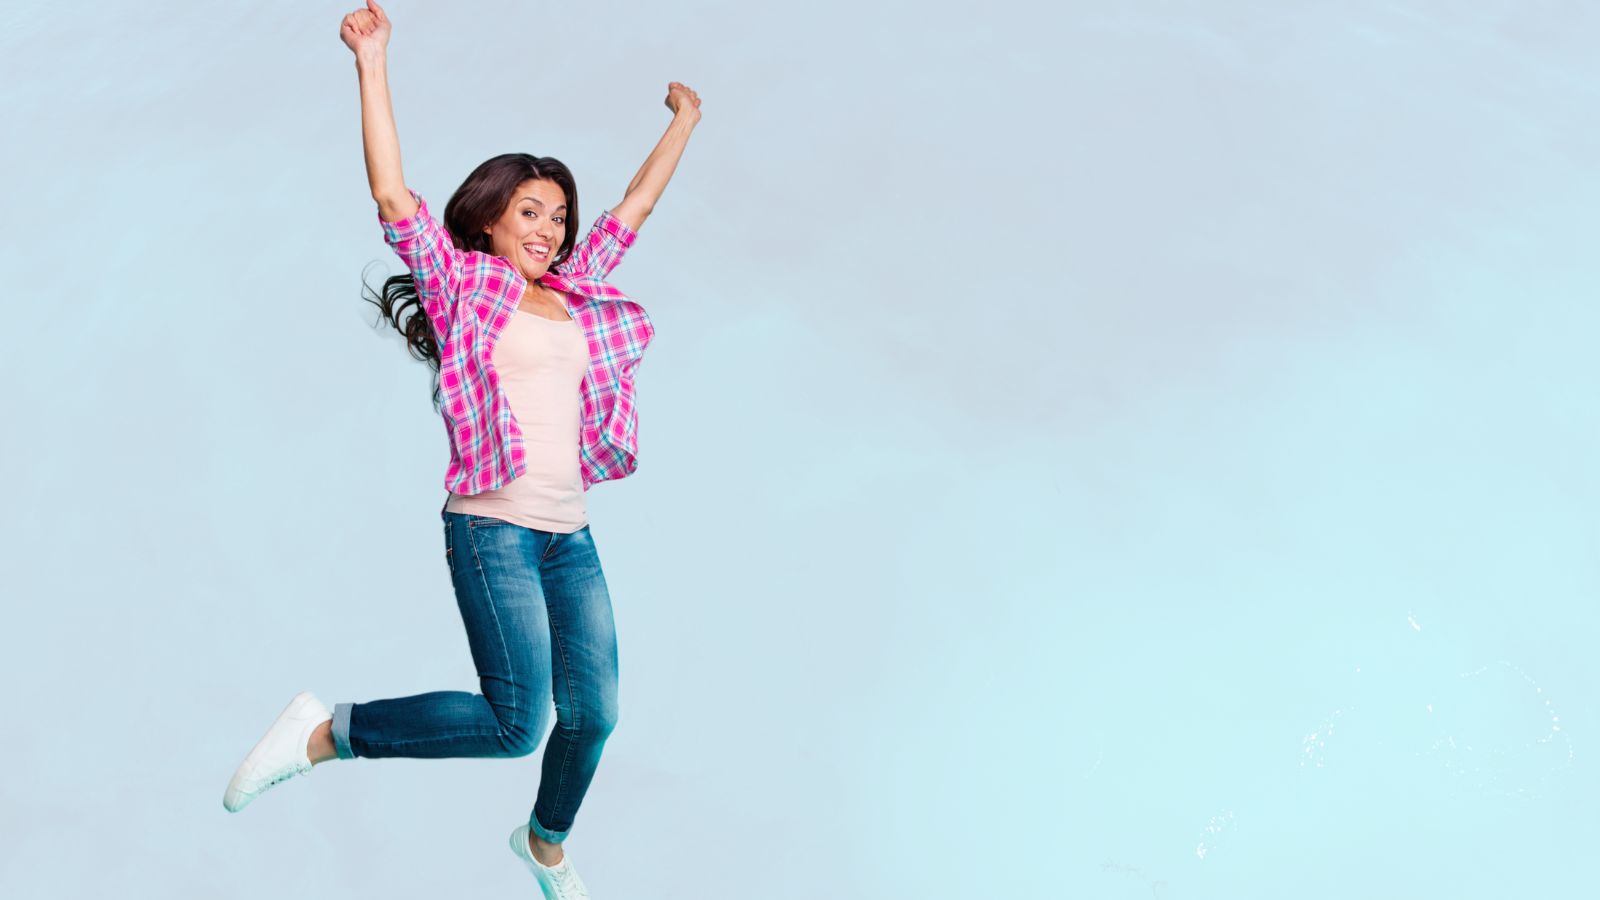 improve your self-esteem dare to give it a go image of woman jumping